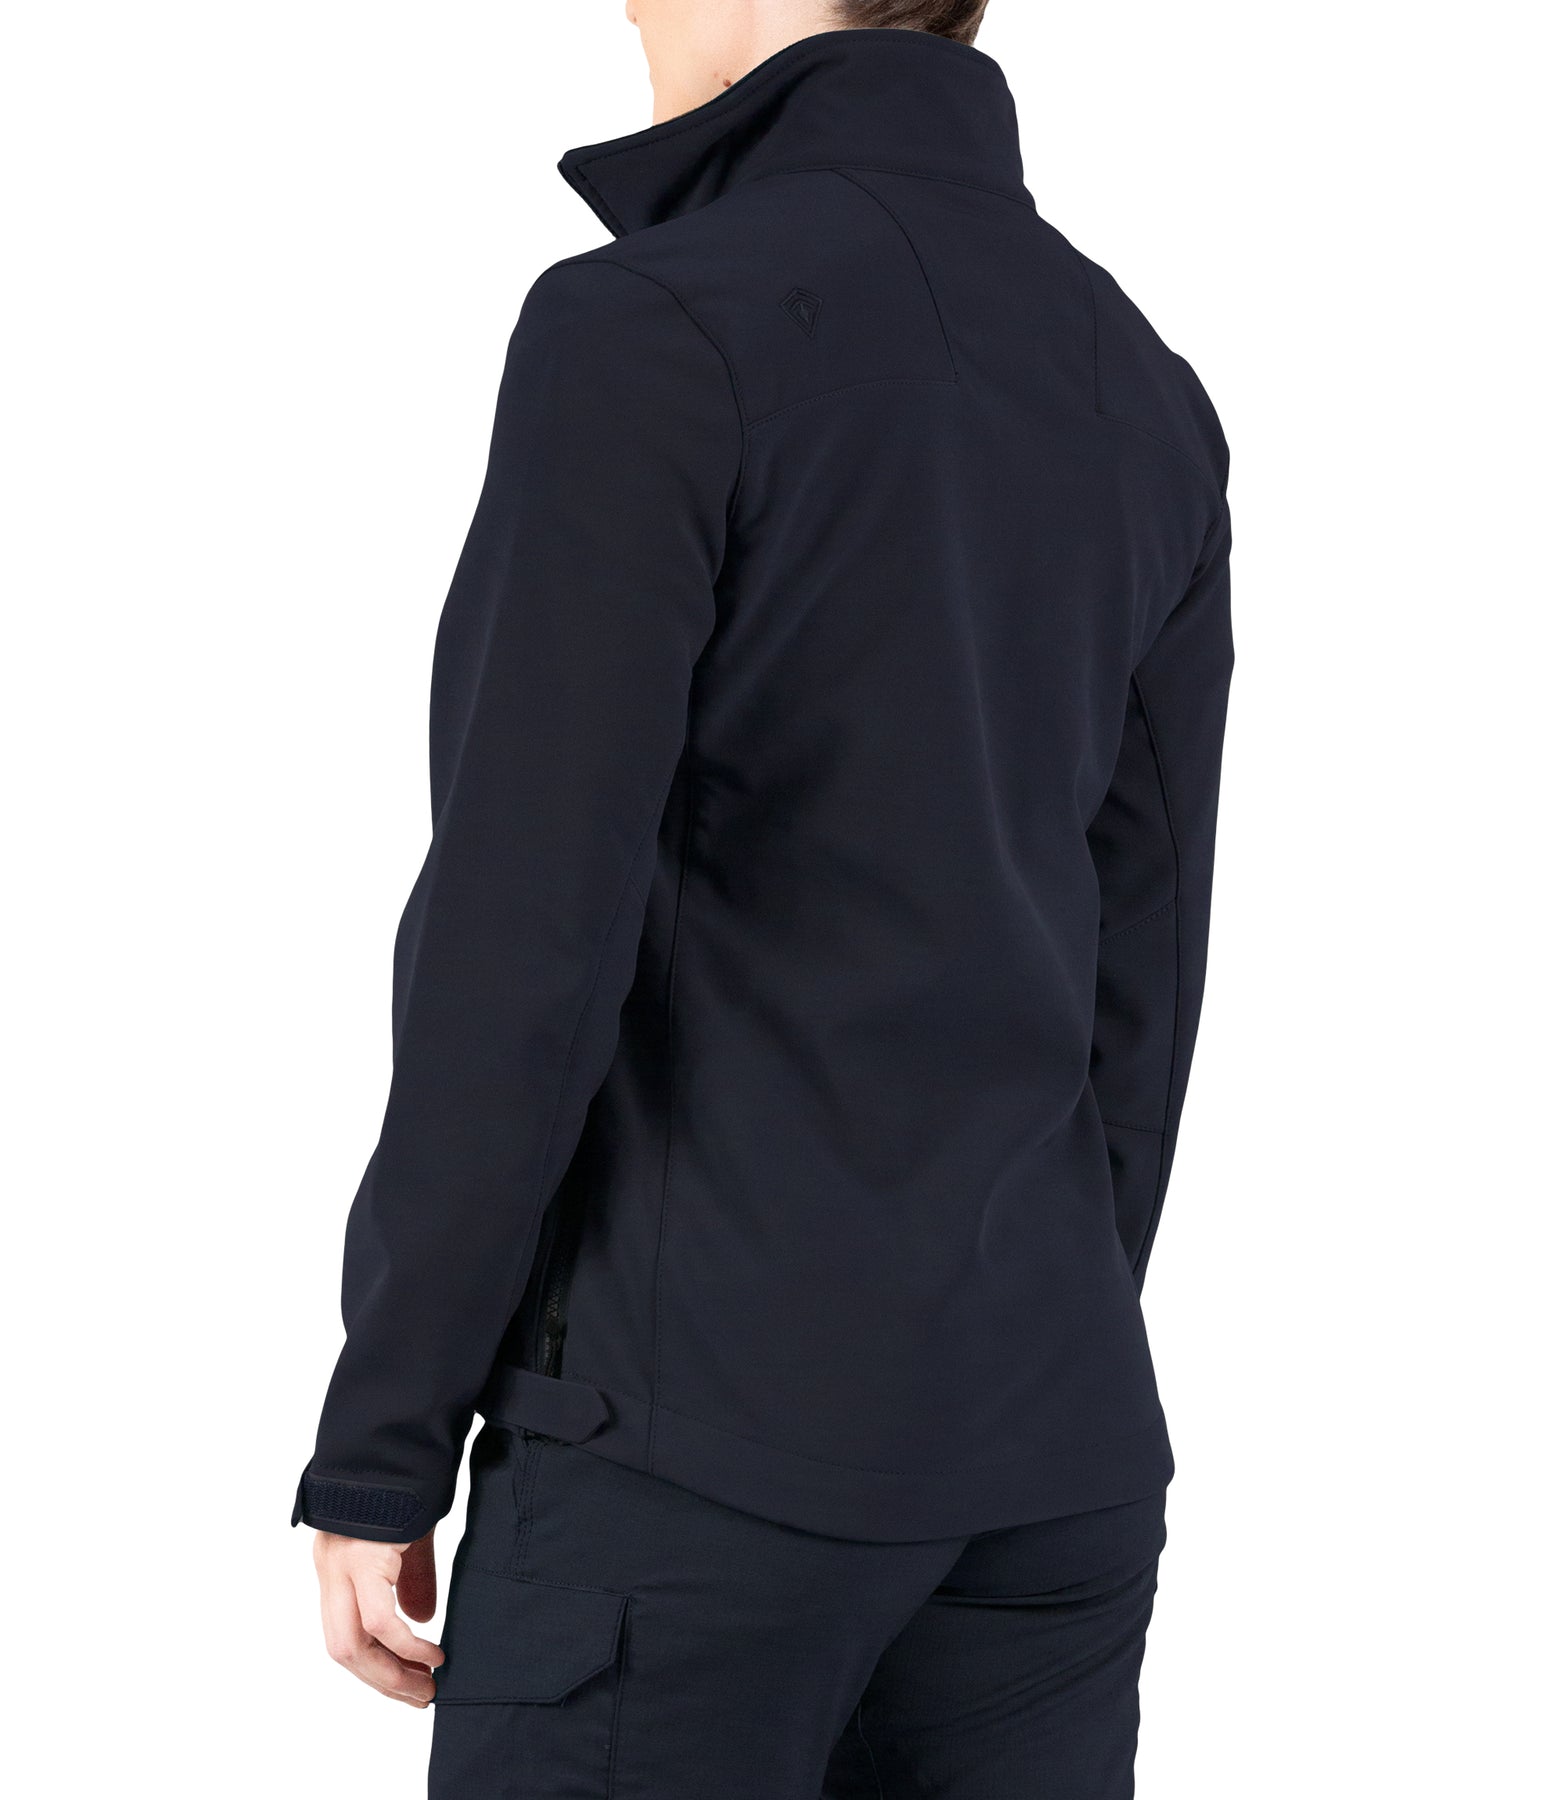 First Tactical Women's Tactix Softshell Jacket